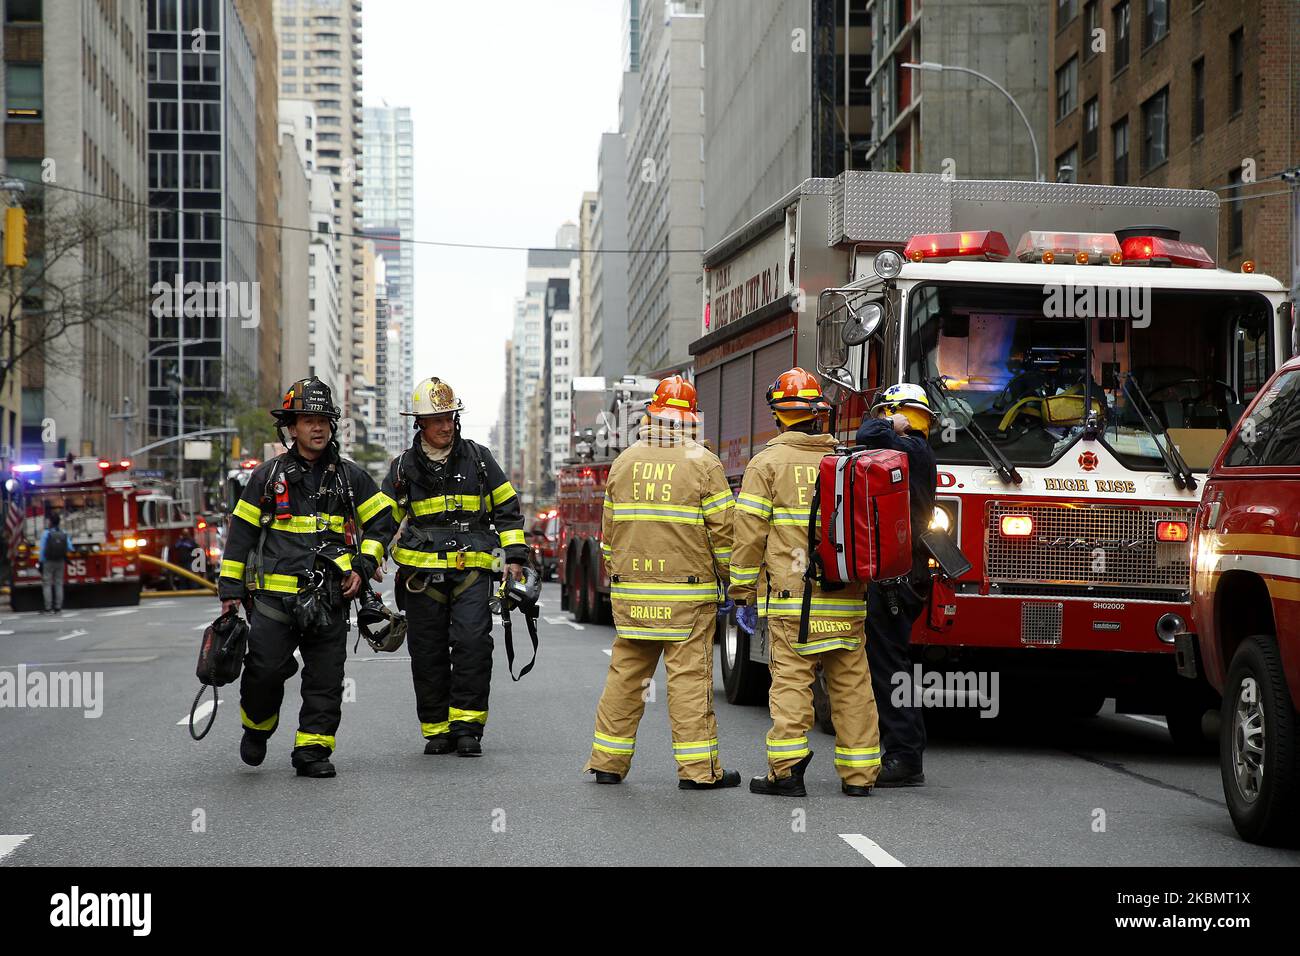 Emergency Services Rescue Personnel and Firemen in New York, on April 23, 2020. New York Fire Department and Emergency services technicians were dispatched to a high-rise in New York City on April 23, 2020. Scores of firetrucks, ambulances and EMT rescue medics stood ready in front of Murray Hill towers on 2nd Avenue. (Photo by John Lamparski/NurPhoto) Stock Photo